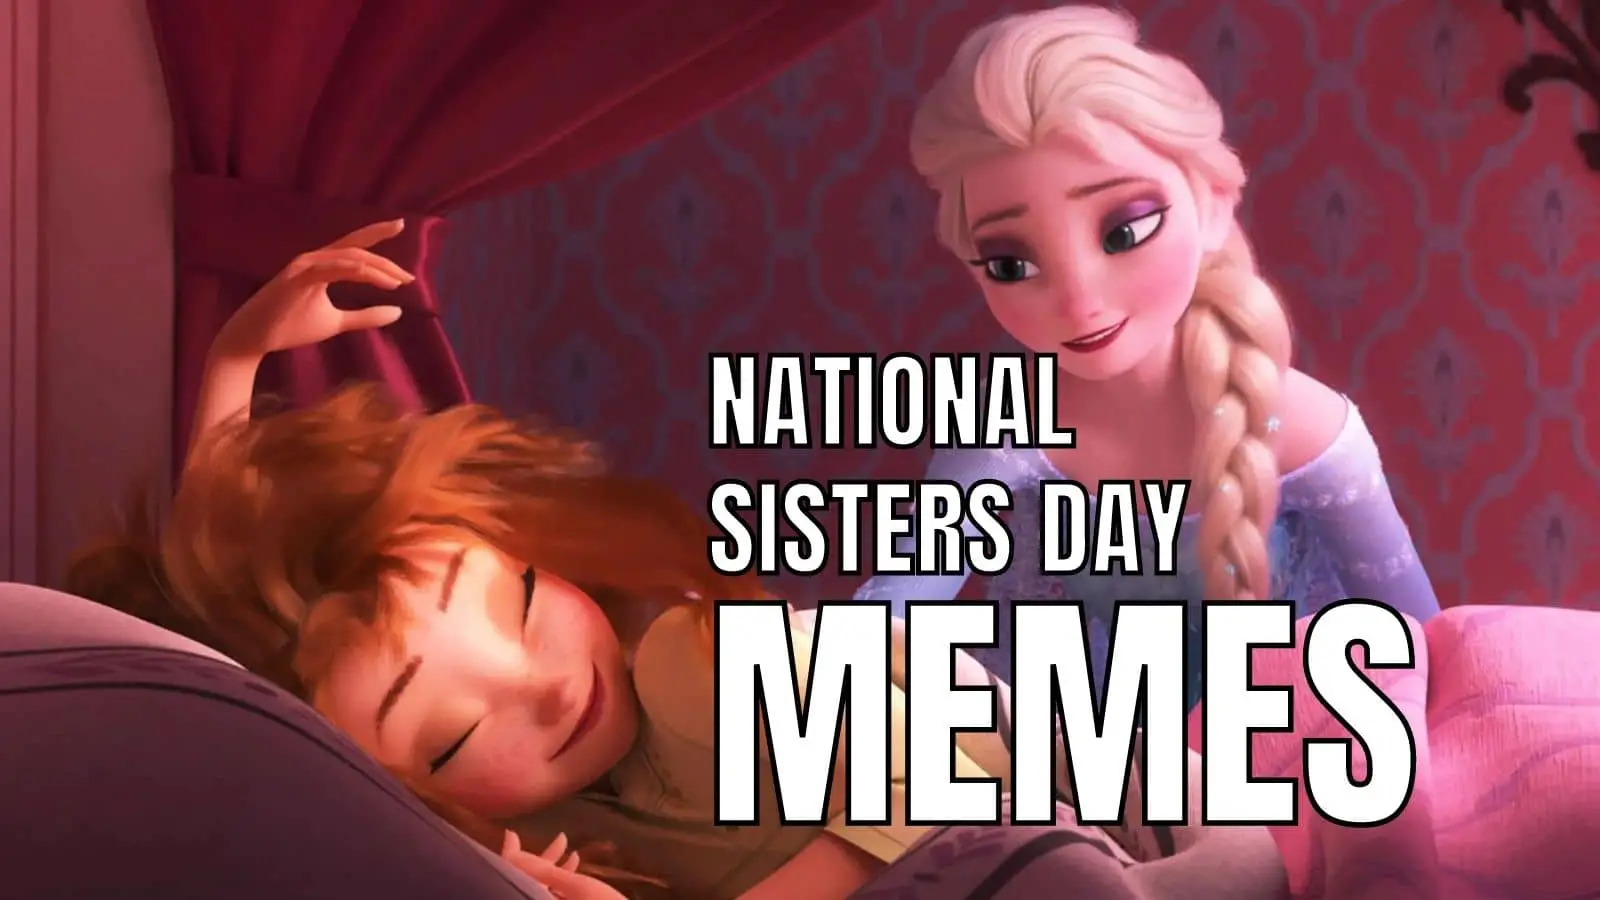 National Sisters Day Memes On Frozen Movie